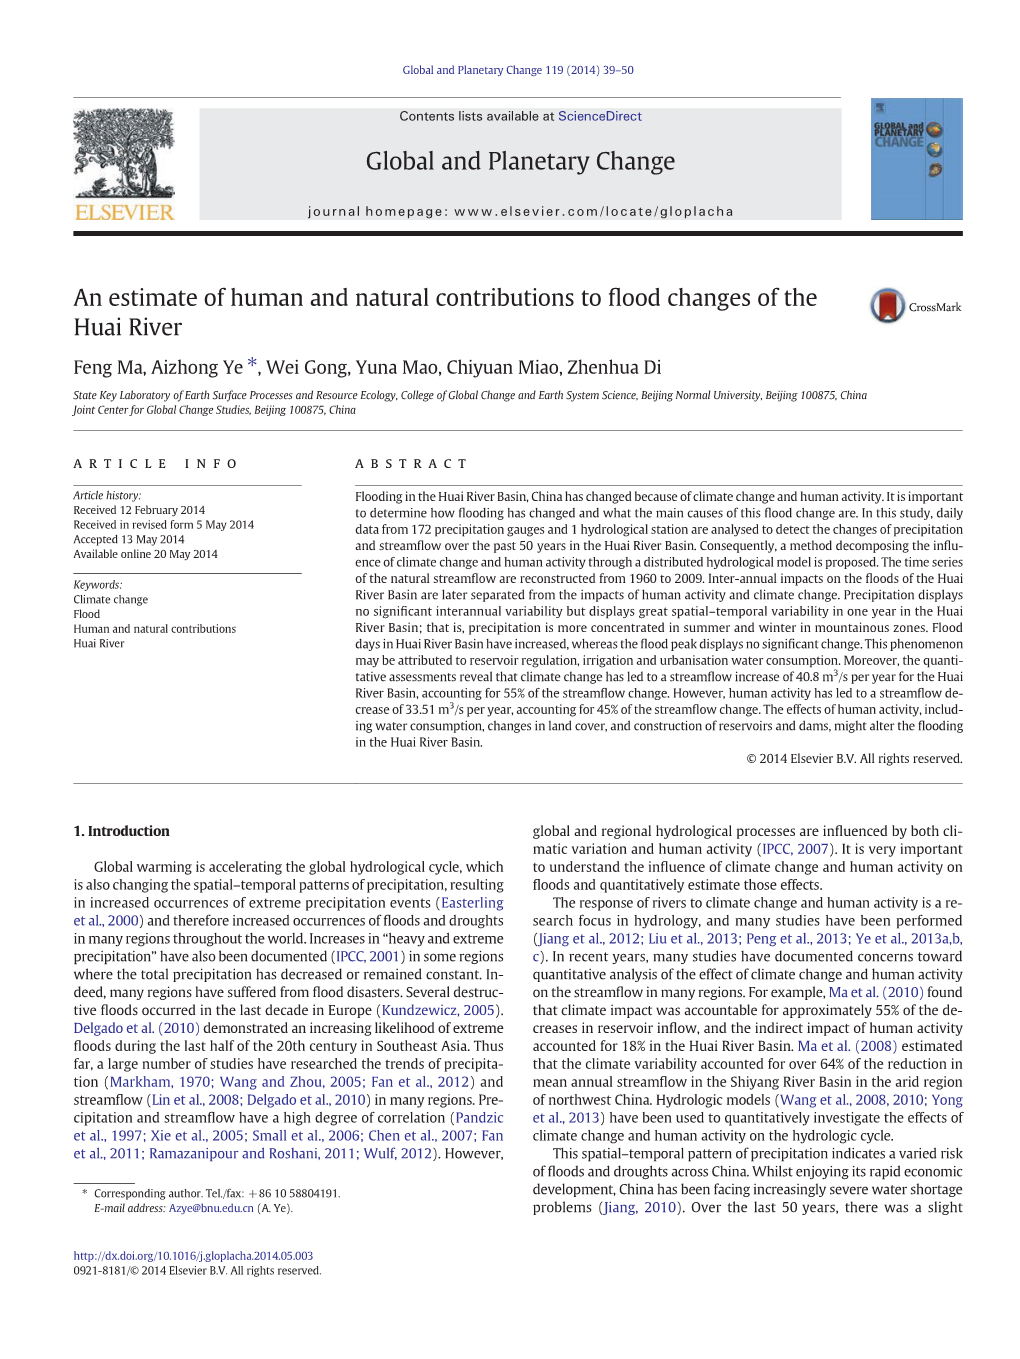 An Estimate of Human and Natural Contributions to Flood Changes Of